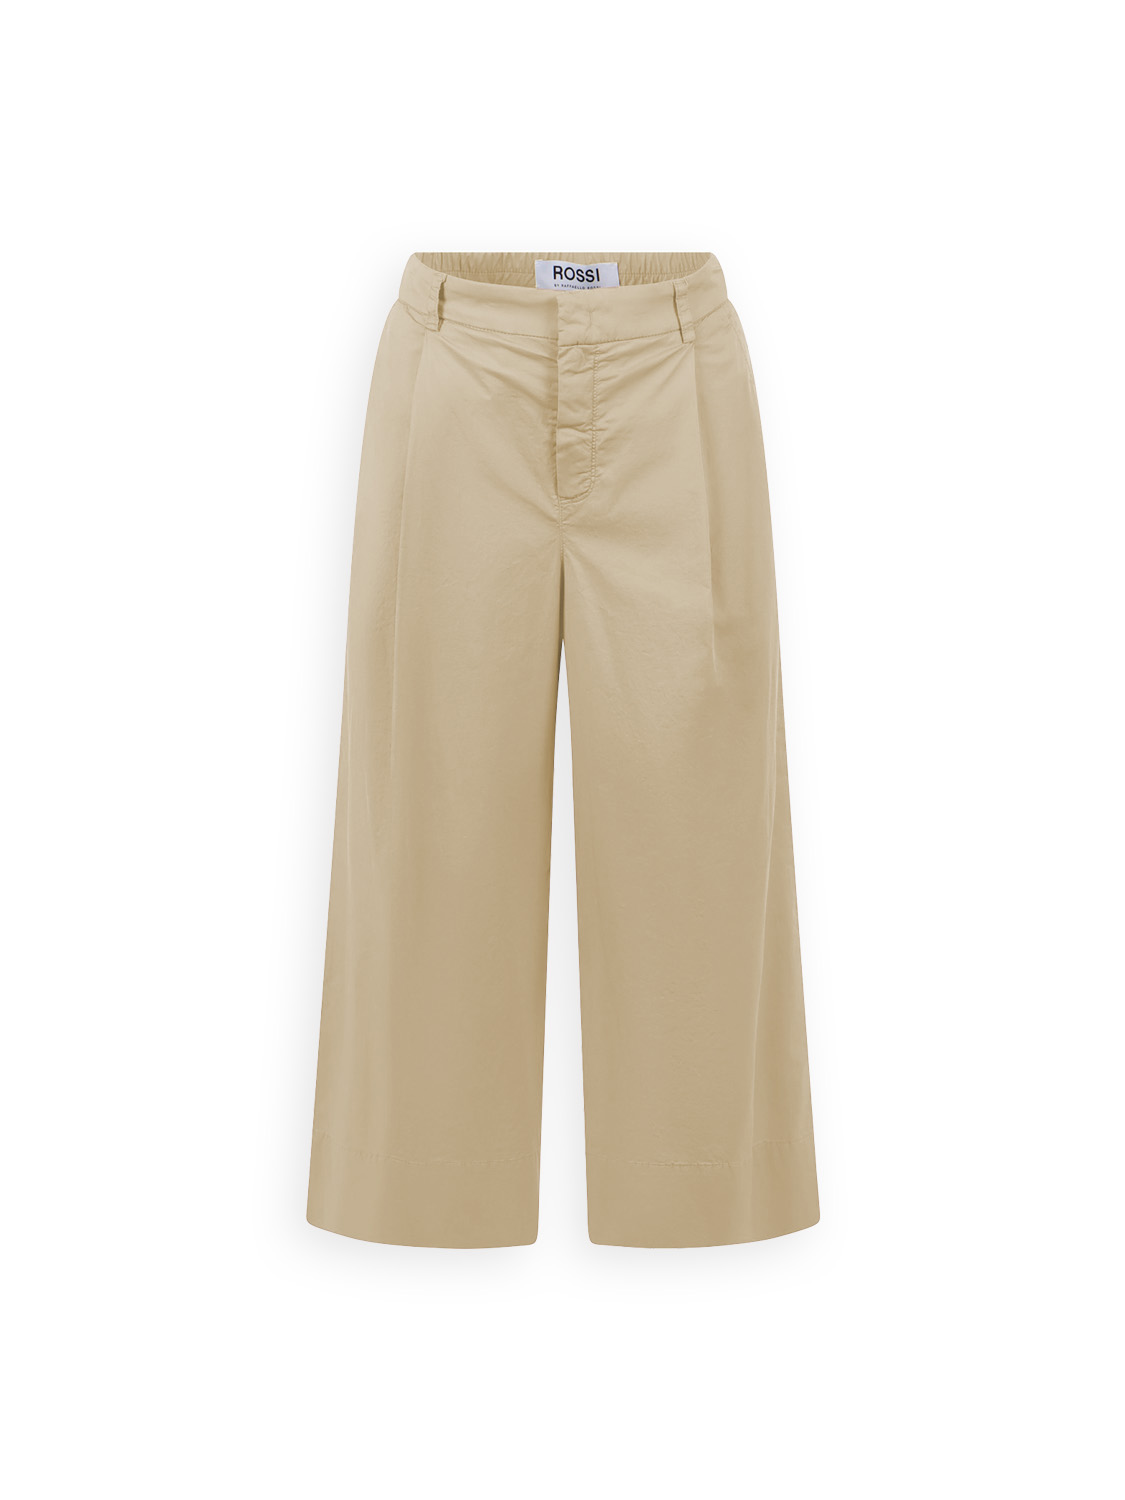 Rossi Trousers with short leg  creme S